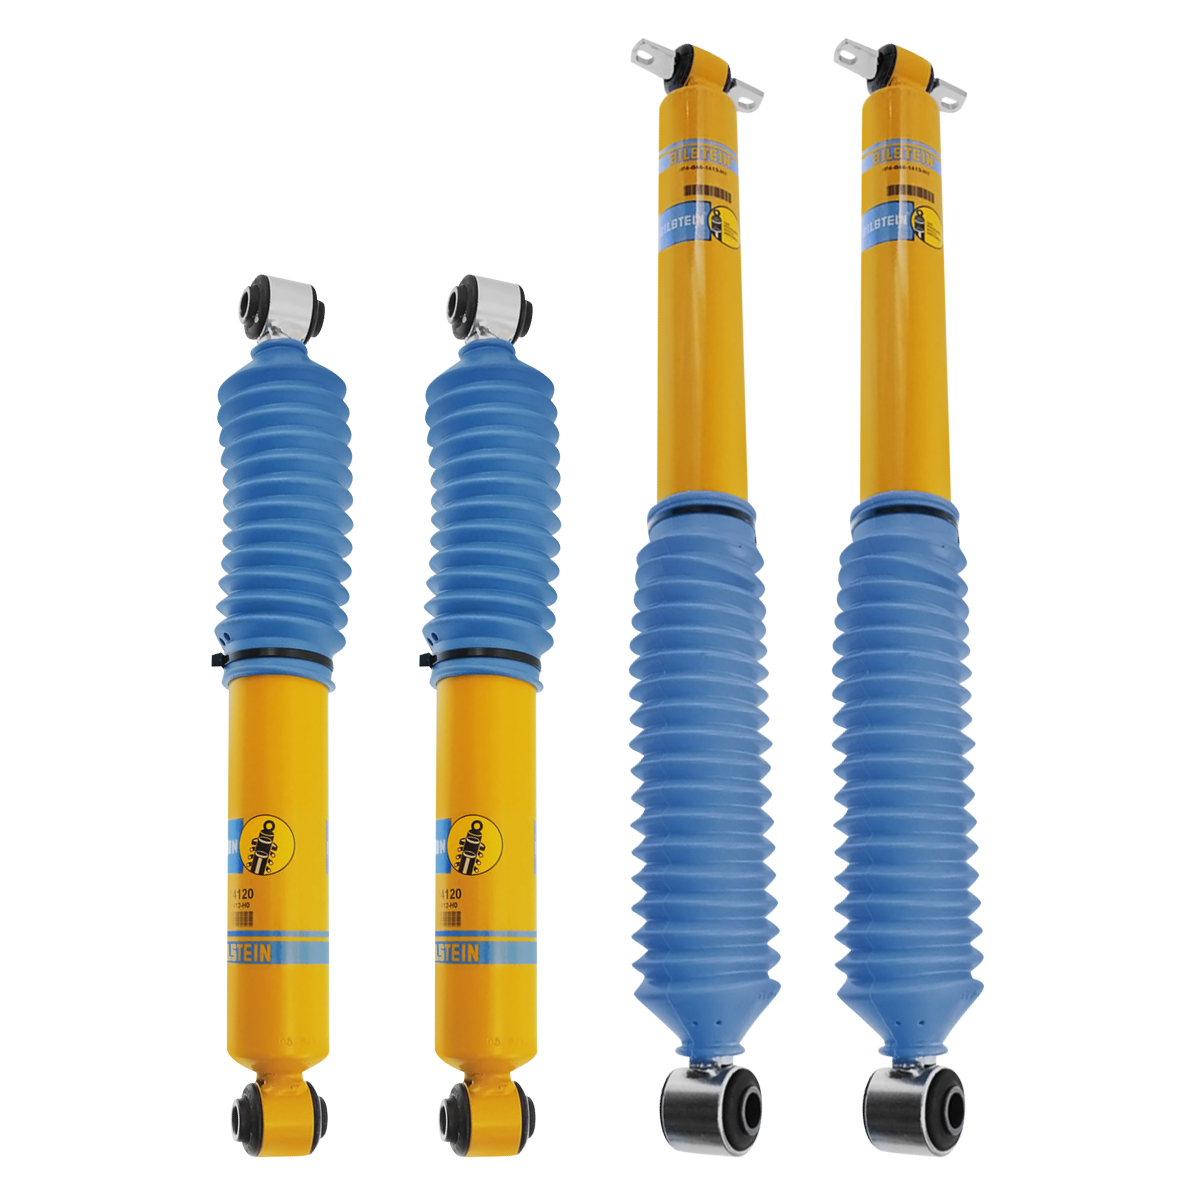 Upgraded Bilstein Shocks for Chevrolet pickup truck 88 89 90 91 92 93 94 95 96 97 98 99 00 01 02 03 04 05 Blazer GMC Jimmy 1988 1989 1990 1991 1992 1993 1994 1995 1996 1997 1998 1999 2000 2001 2002 2003 2004 2005 24-014120 Front and 24-014137 Rear Shock Absorbers Factory Shocks Replacements